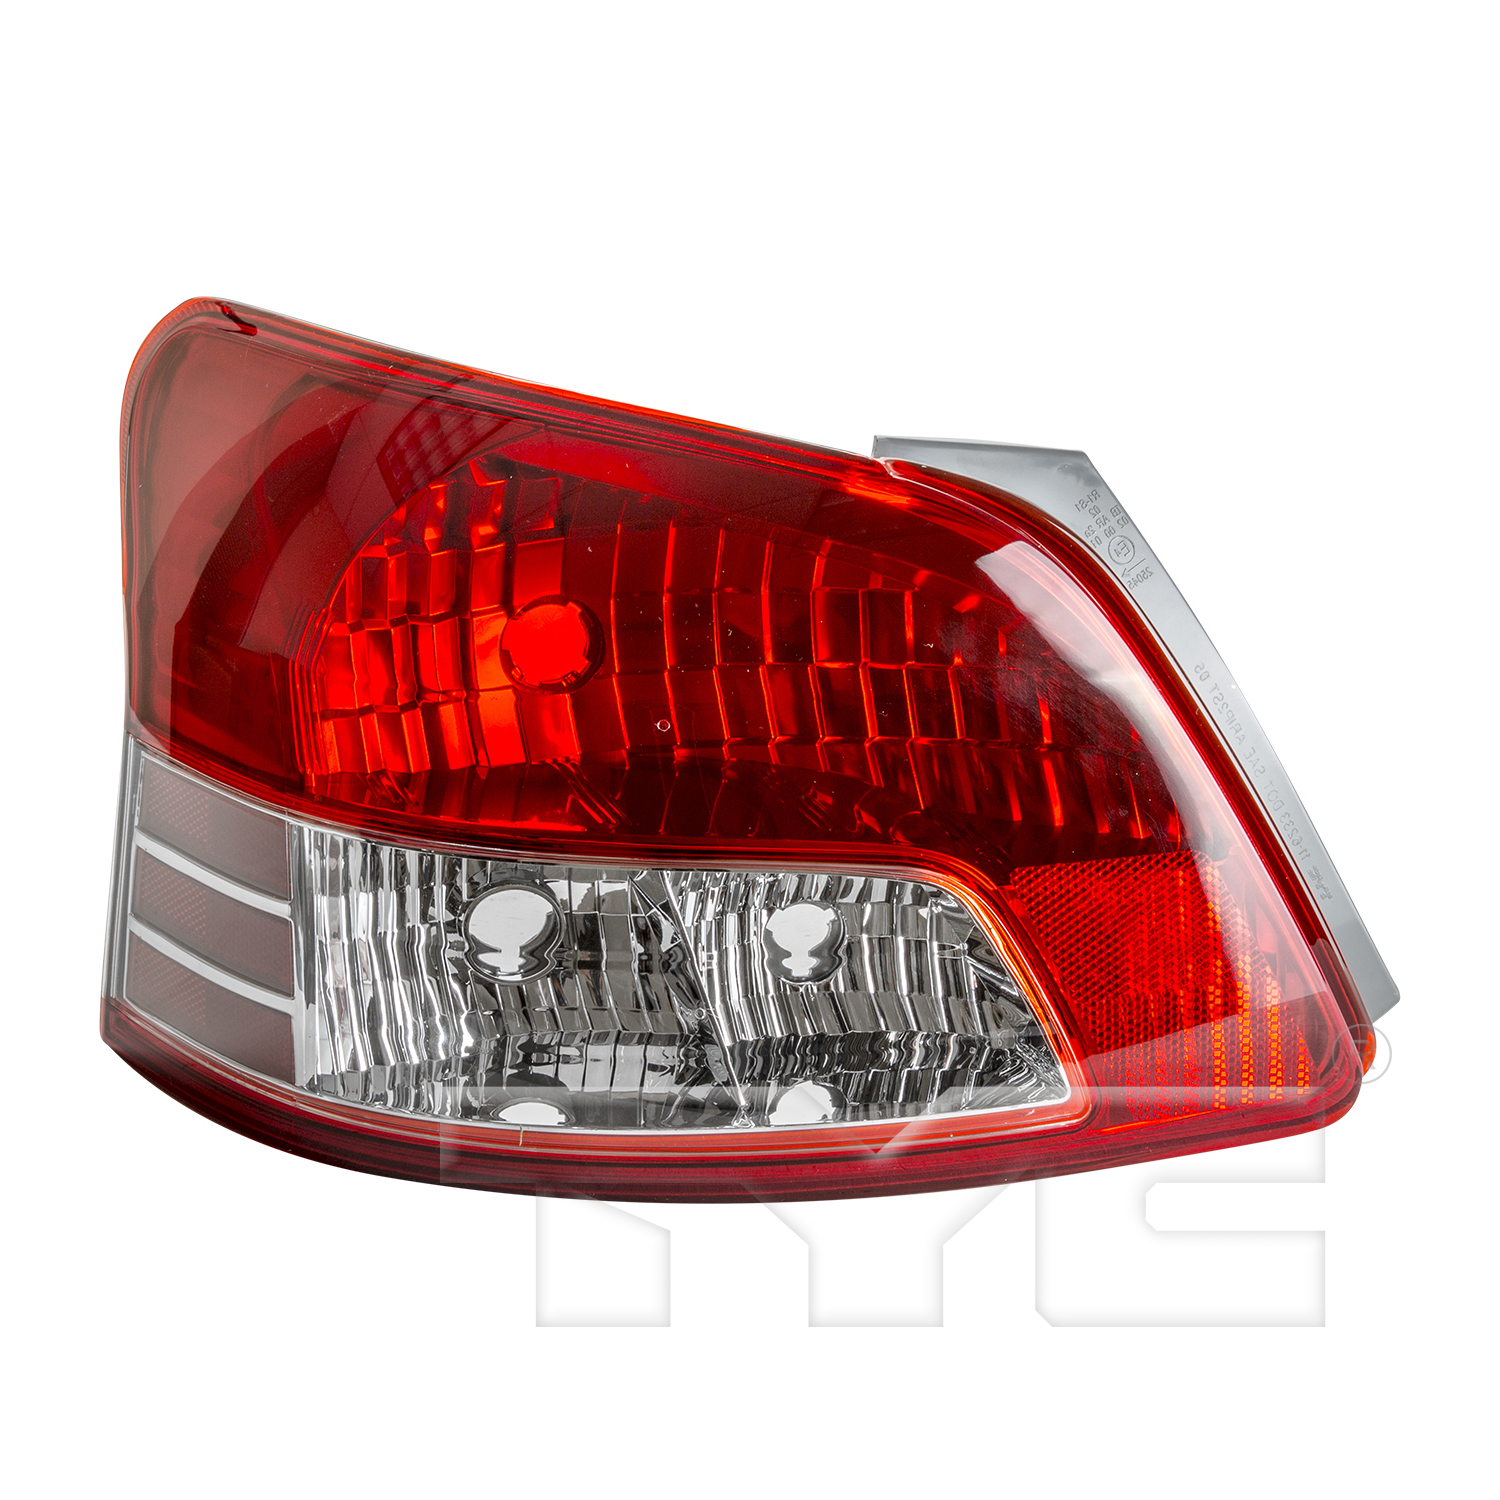 Aftermarket TAILLIGHTS for TOYOTA - YARIS, YARIS,07-11,LT Taillamp lens/housing